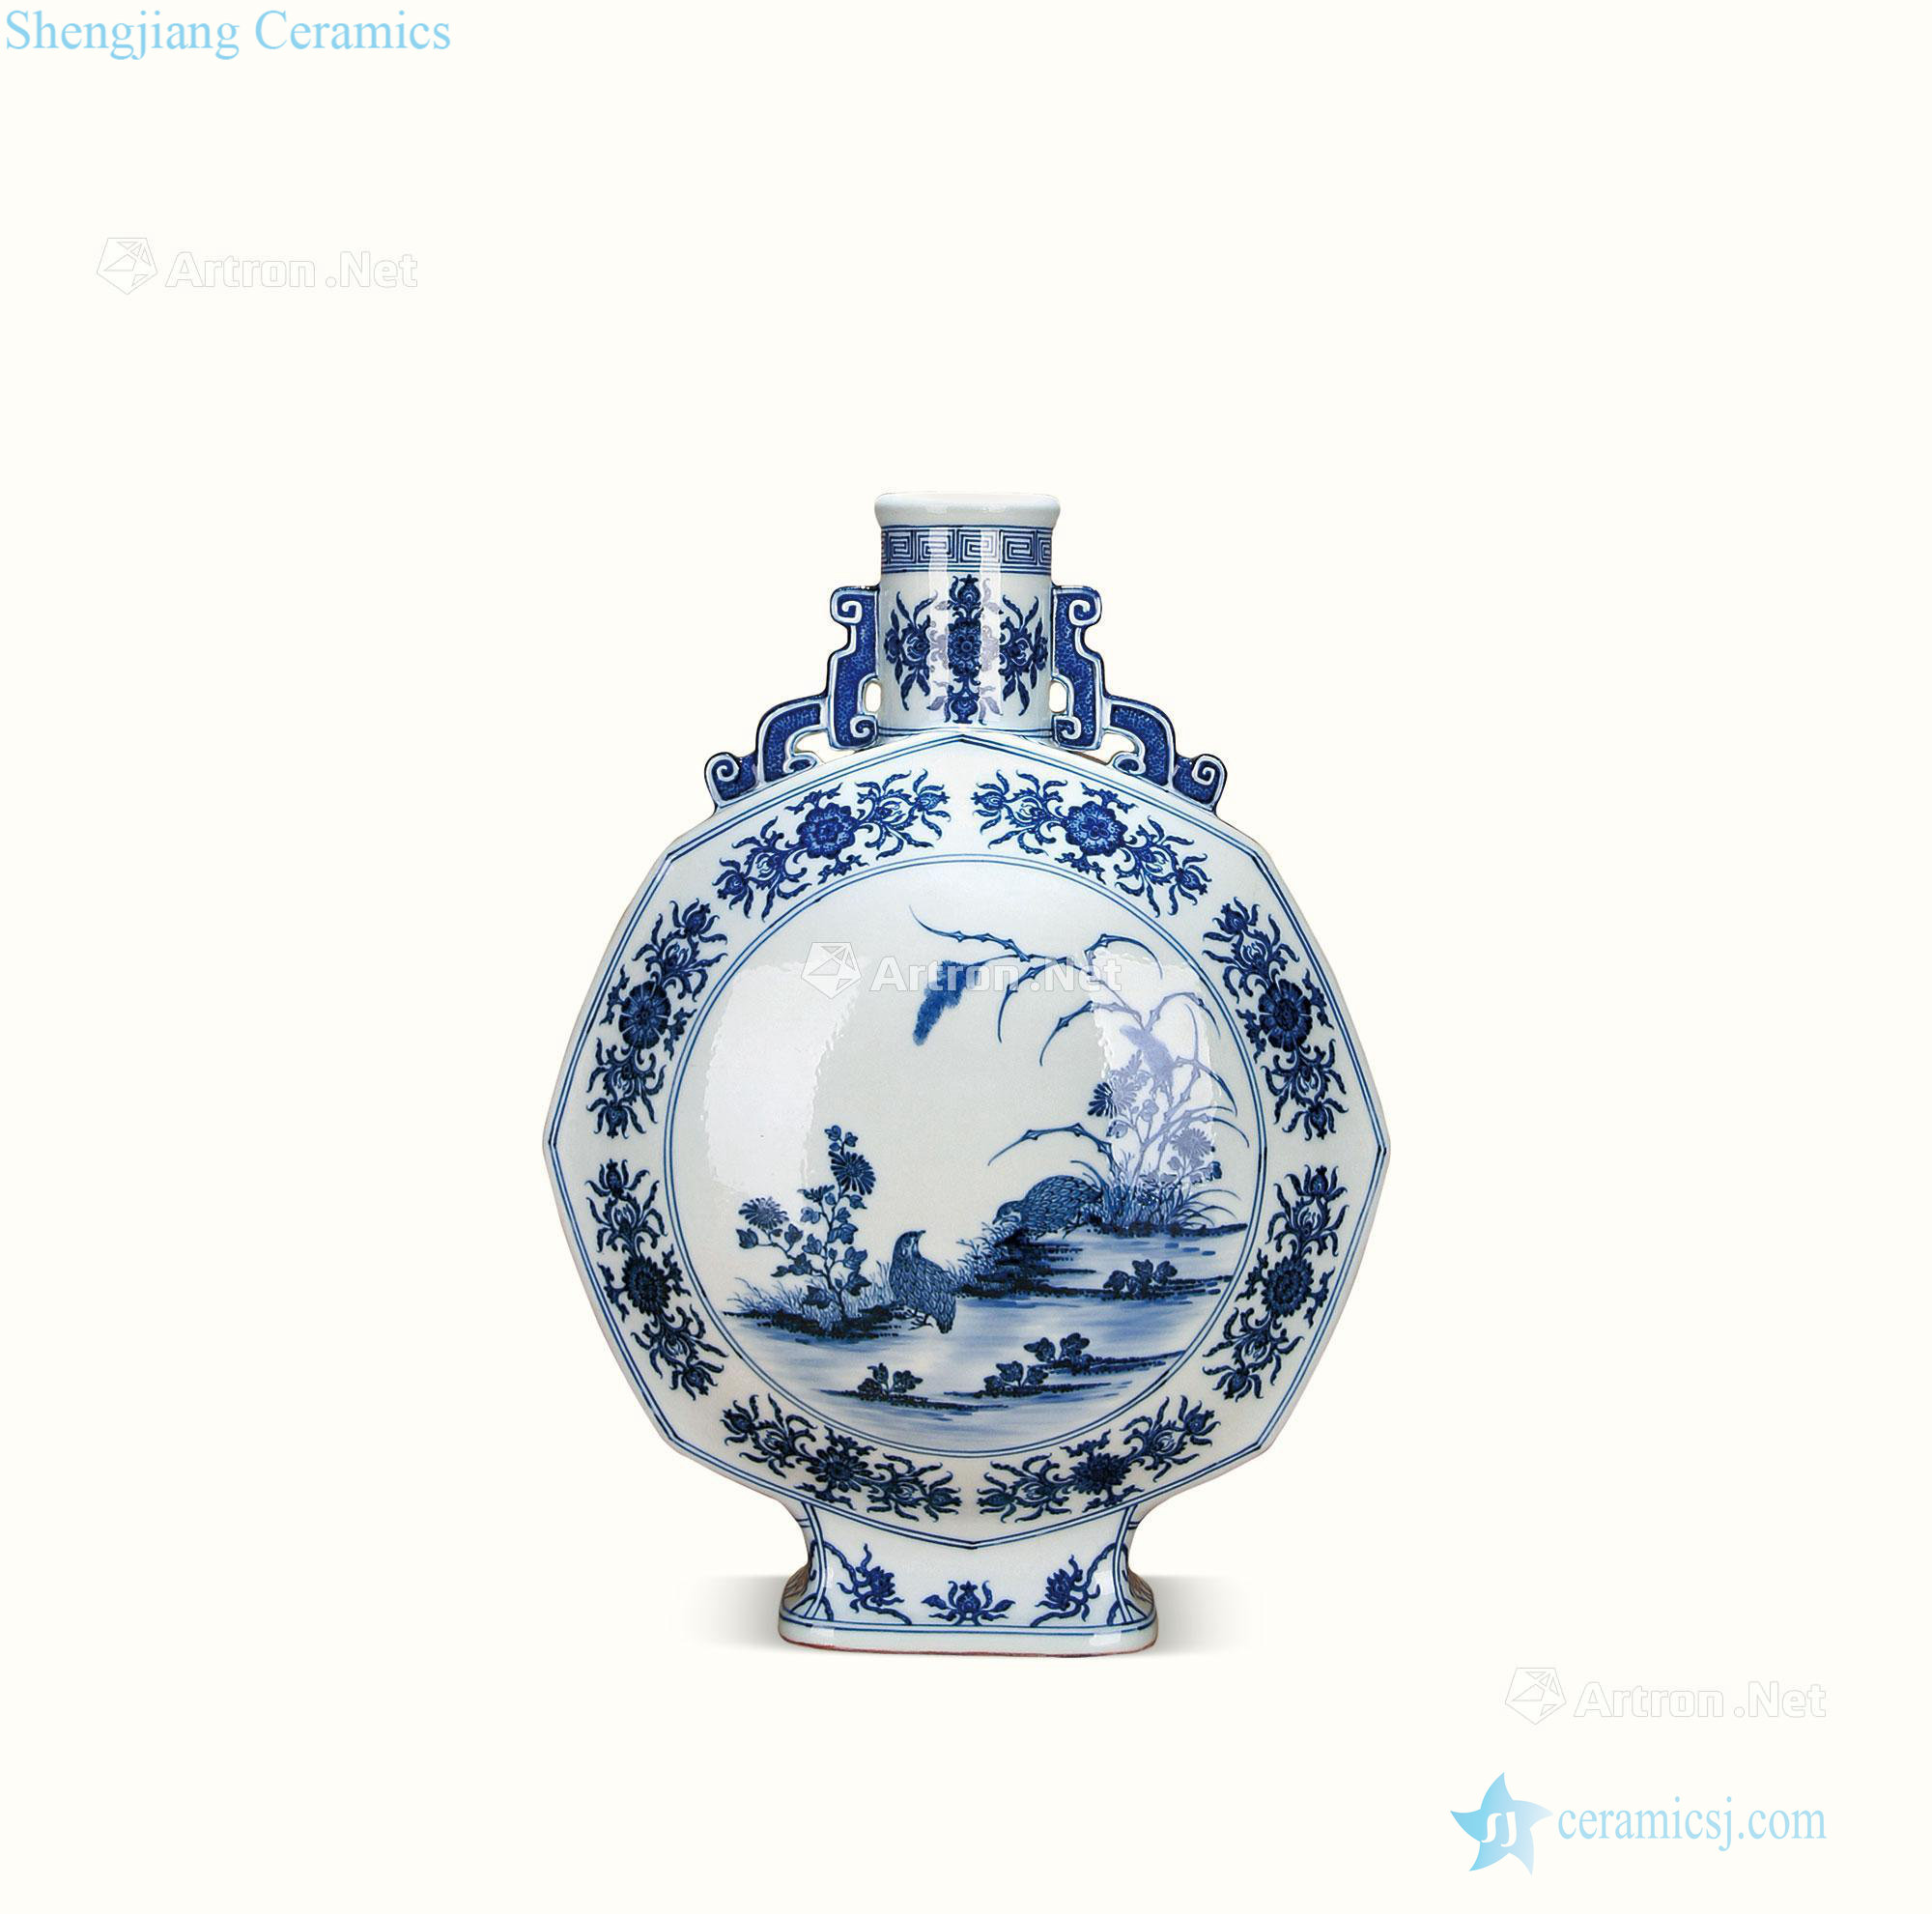 Qing dynasty blue and white to live and work in peace and contentment on flat bottles